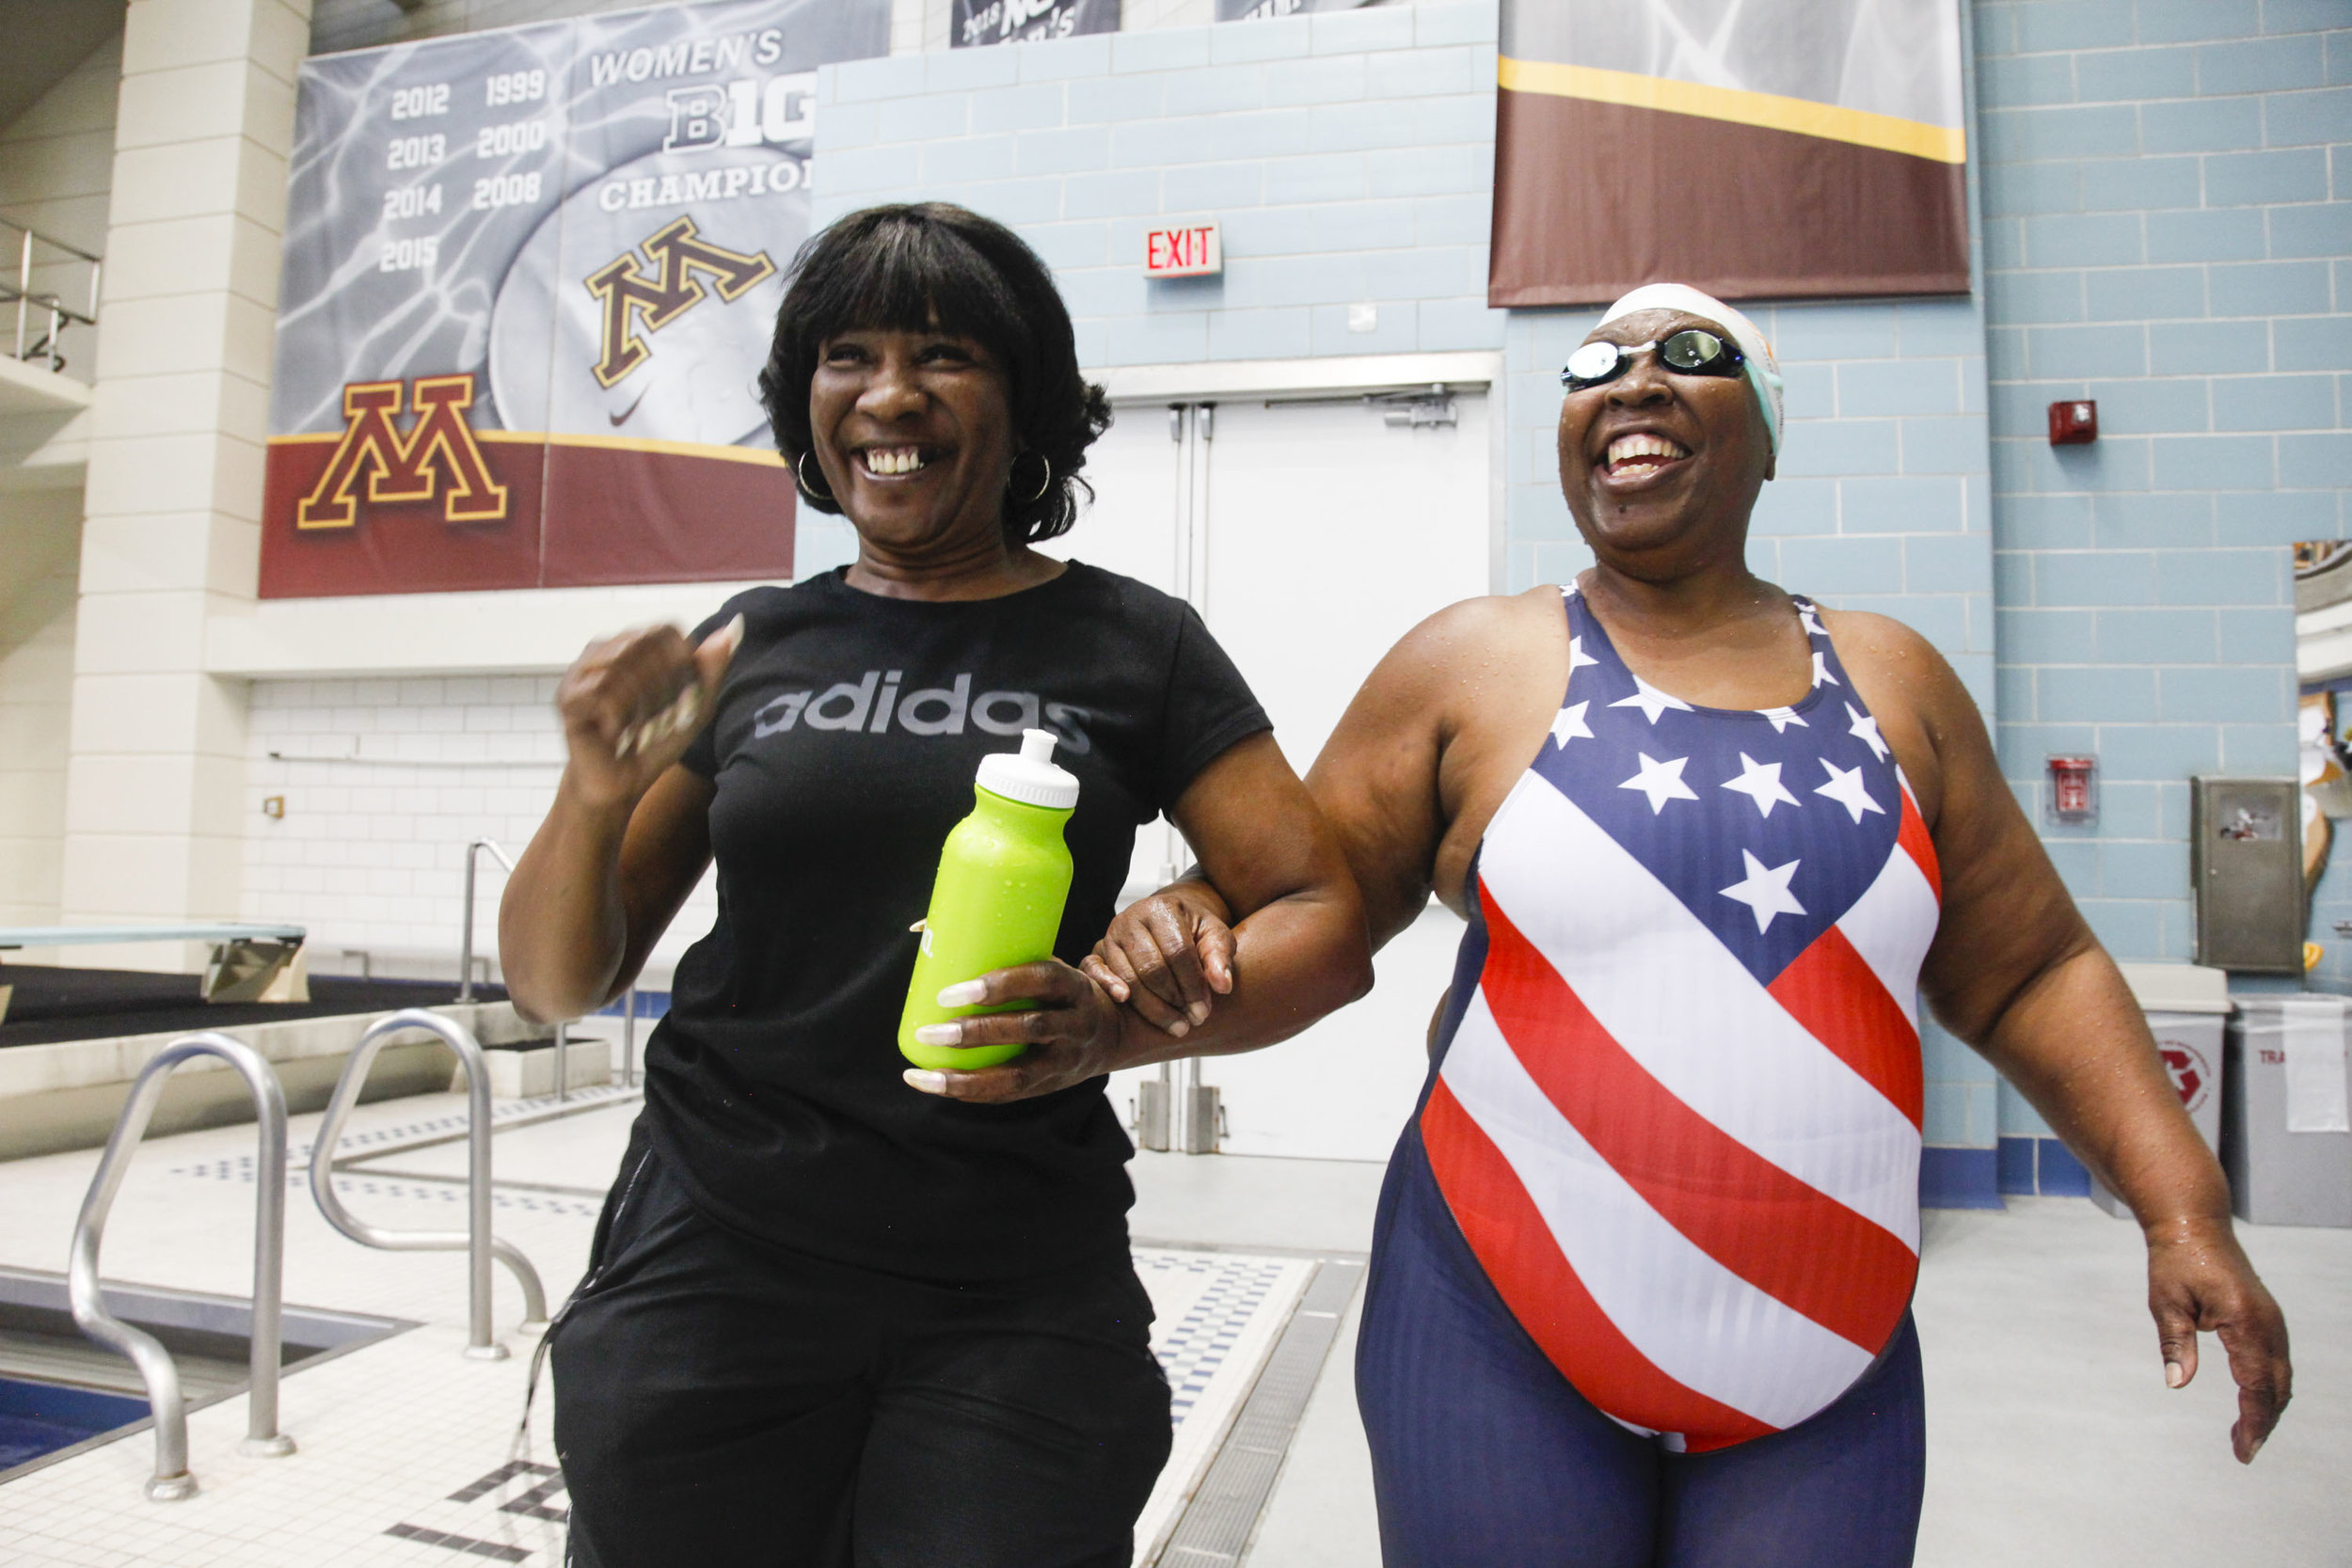  Patricia Henderson (left) dances as she guides her sister, &nbsp;Vivian Stancil (right) to the bleachers during the National Senior Games swim meet that took place at the University of Minneapolis Aquatic Center in Minneapolis, MN. on Jul. 8, 2015. 